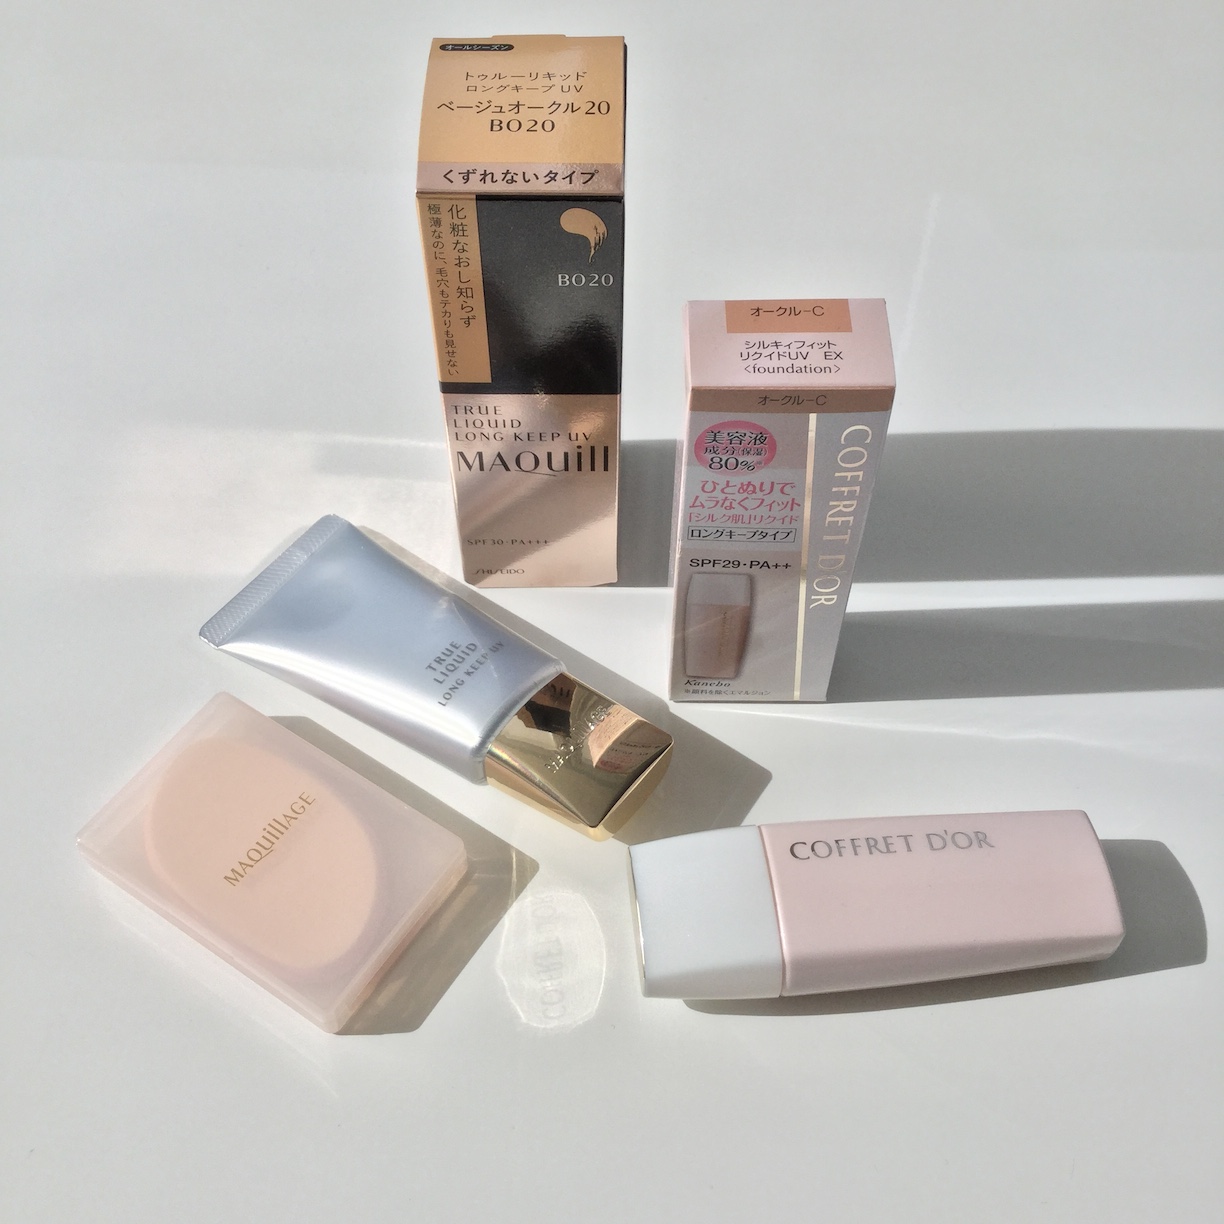 Thalia Beauté Maquillage and Coffret D'or Foundation Review